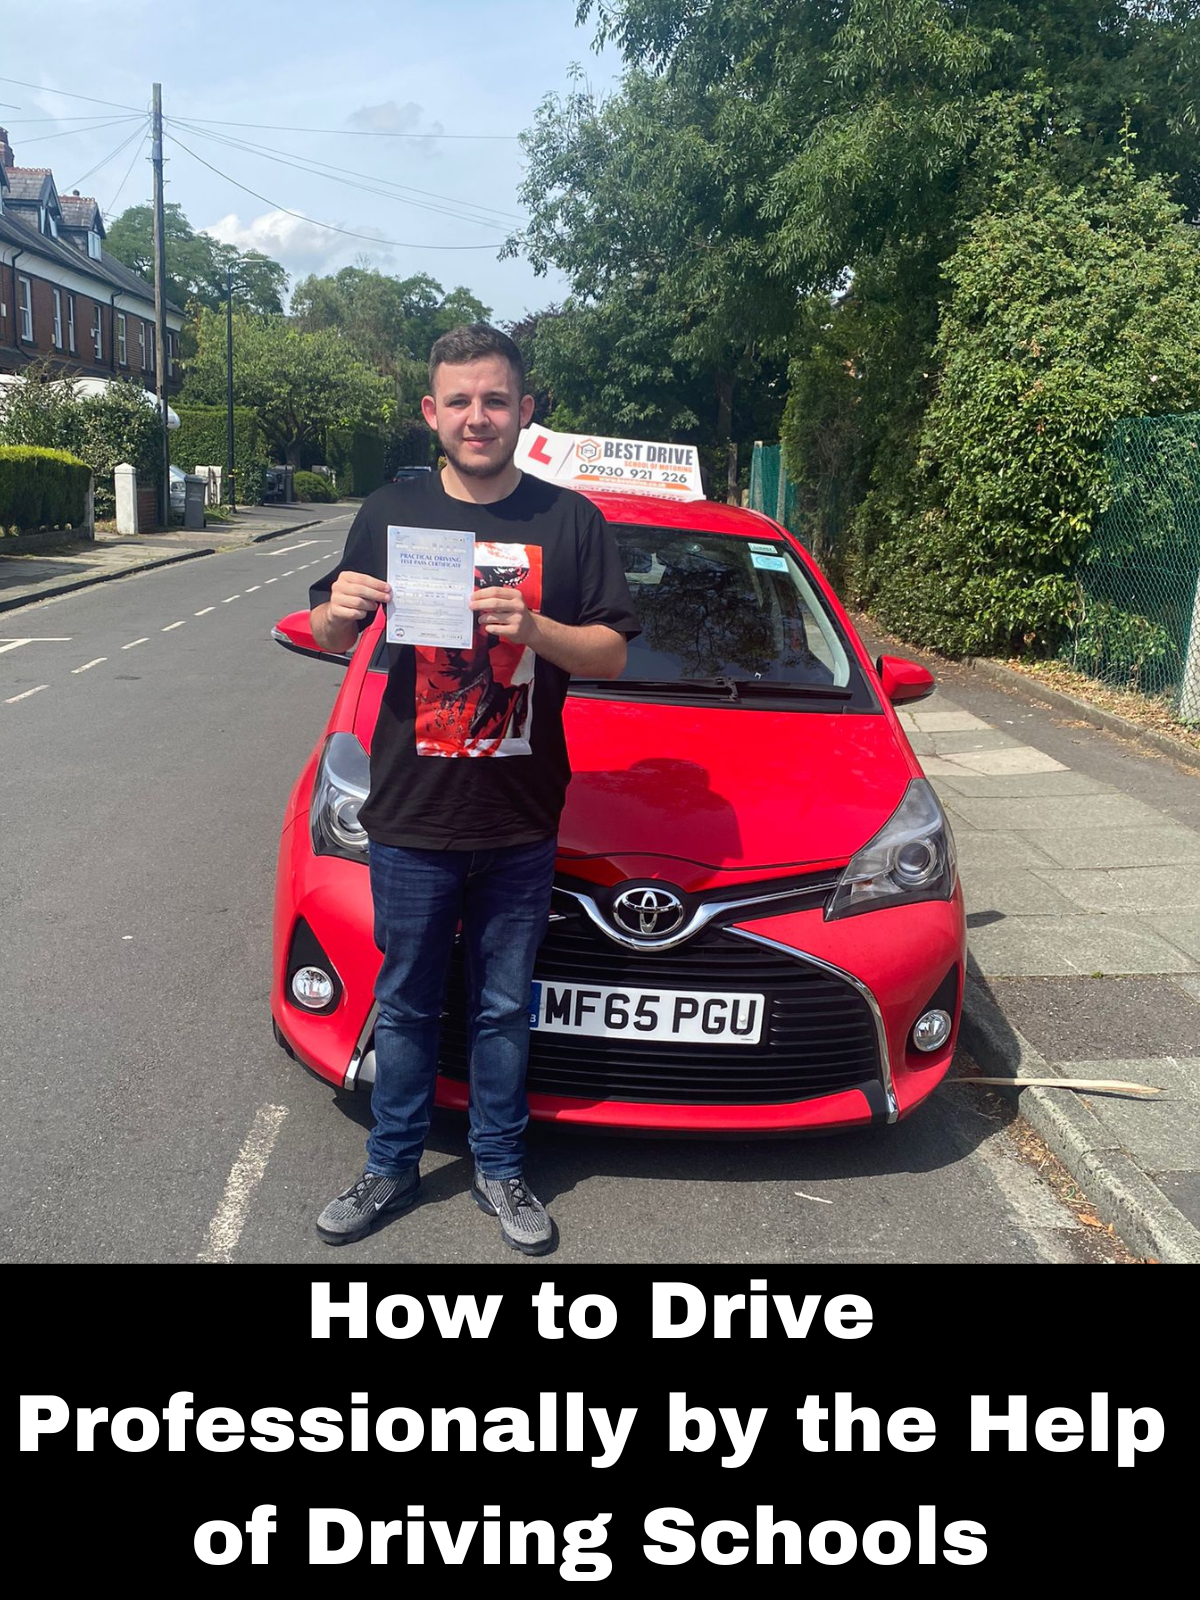 How to Drive Professionally by the Help of Driving Schools